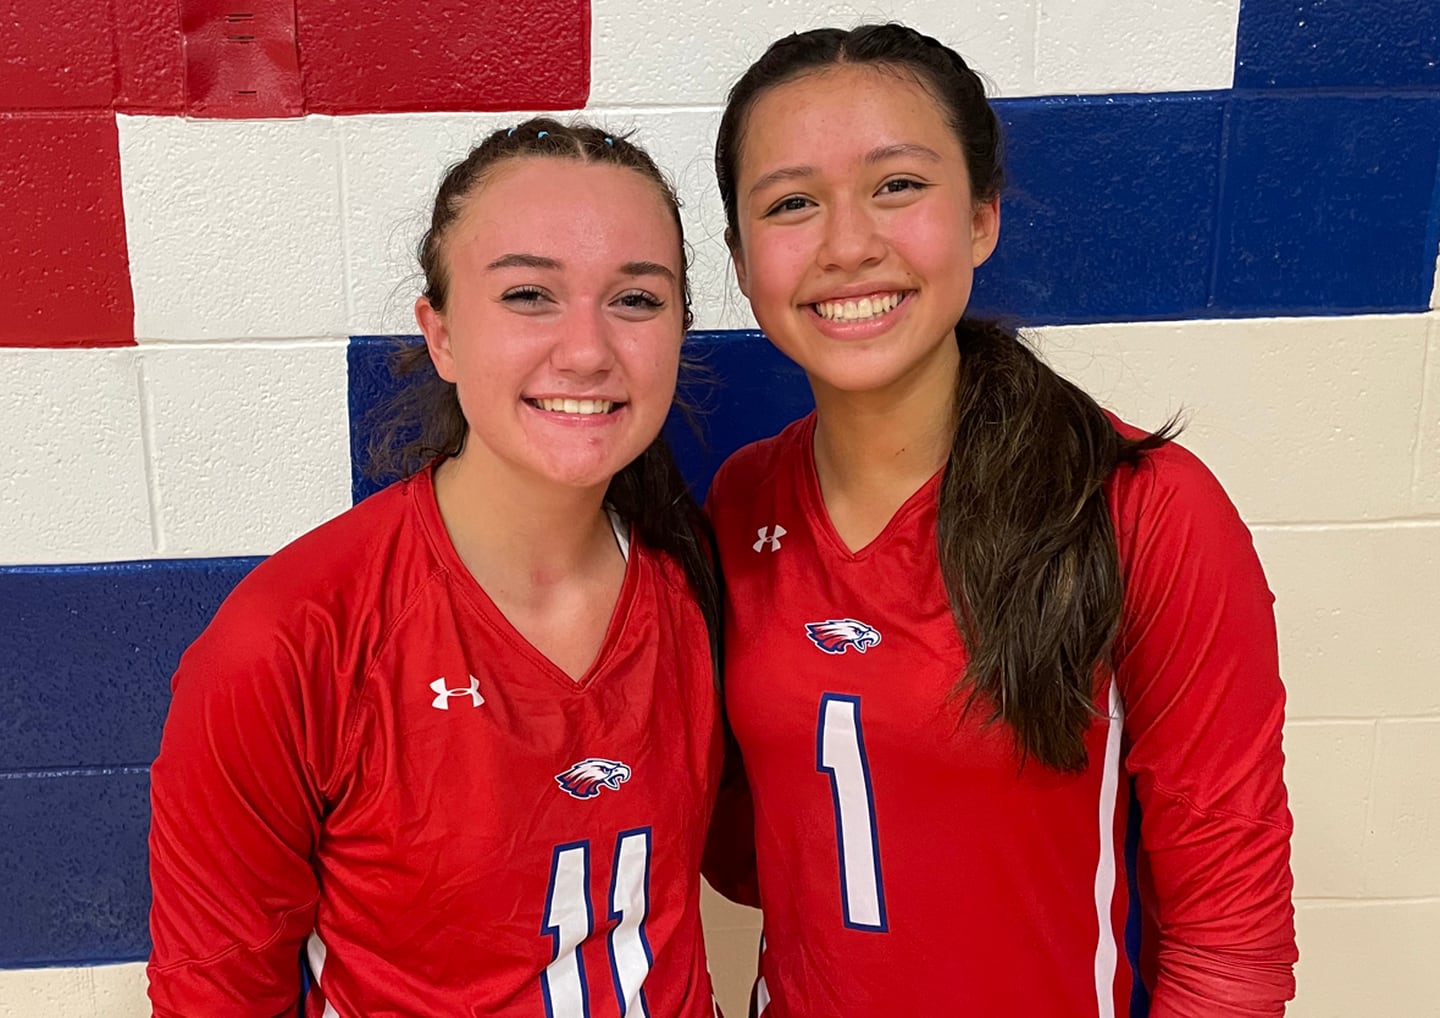 Brianna Bossom (11) and Mailinh Godschall (1) led No. 3 Centennial to a season-opening volleyball victory over No. 9 Howard Tuesday night. Godschall pounded out 12 kills while Bossom had 39 assists.